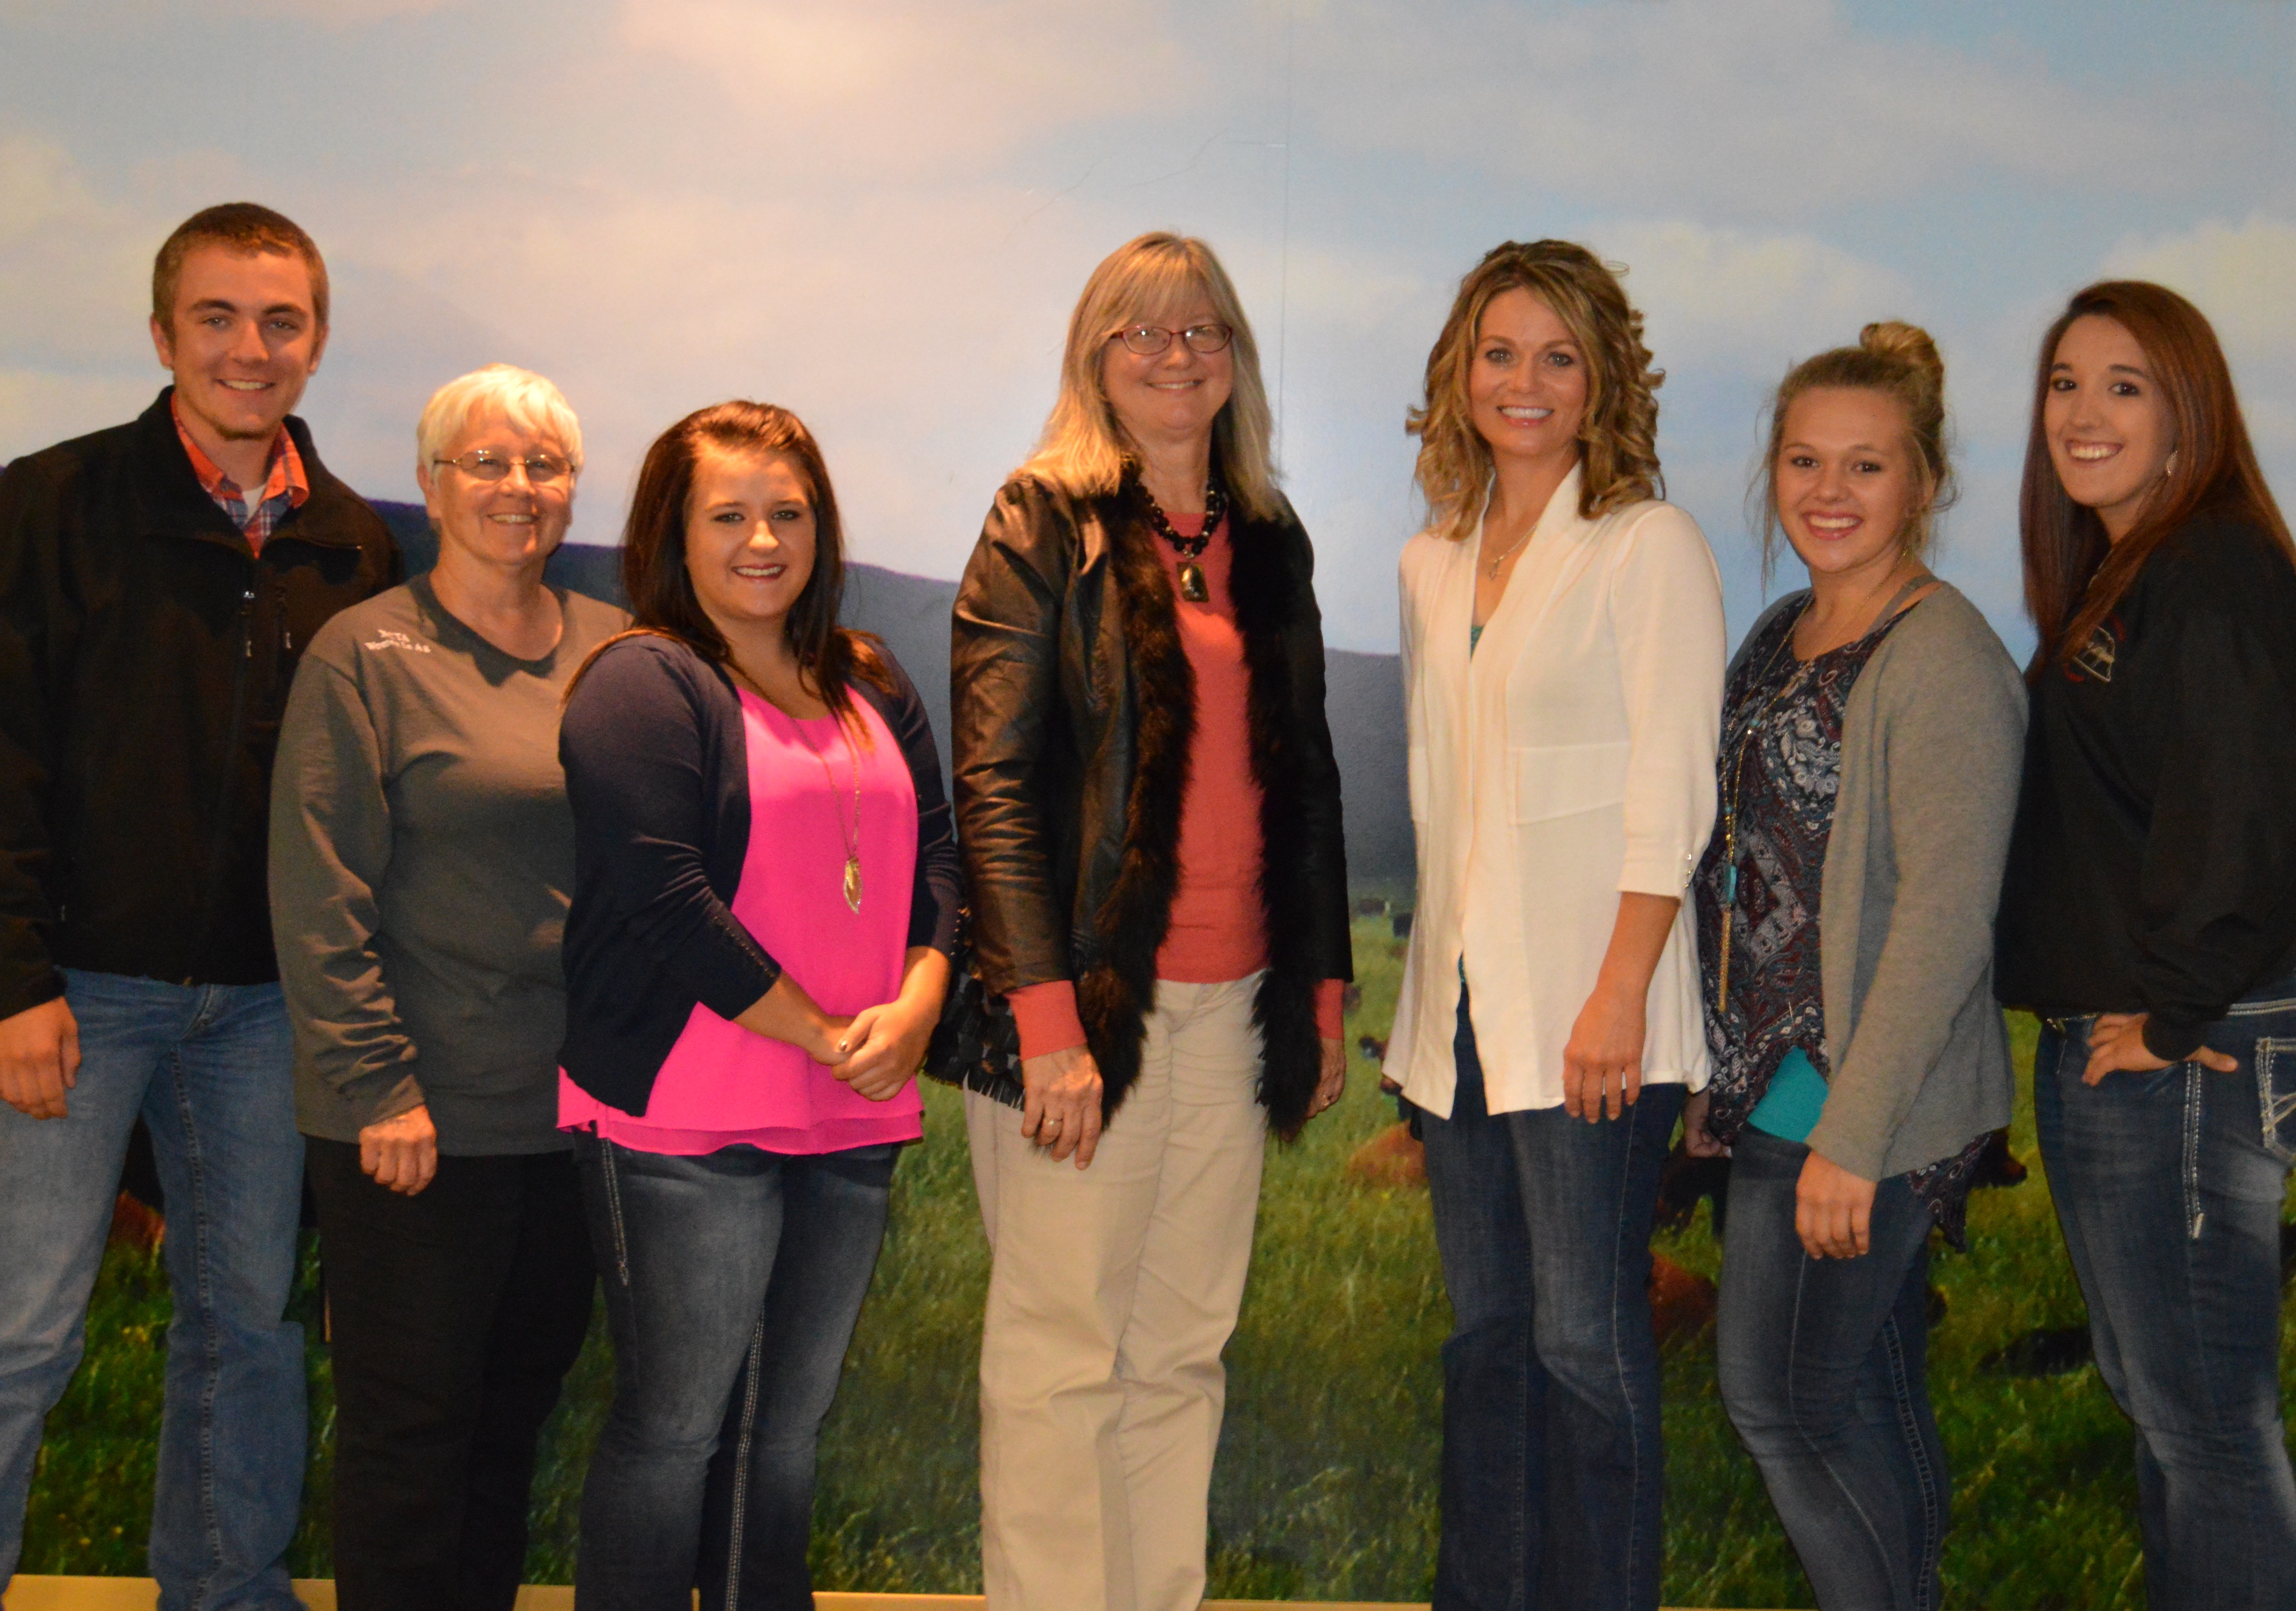 Collegiate Cattlemen and Women in Agriculture hosted two women who are leaders in the beef cattle industry. (C. TIlford/NCTA News photo)